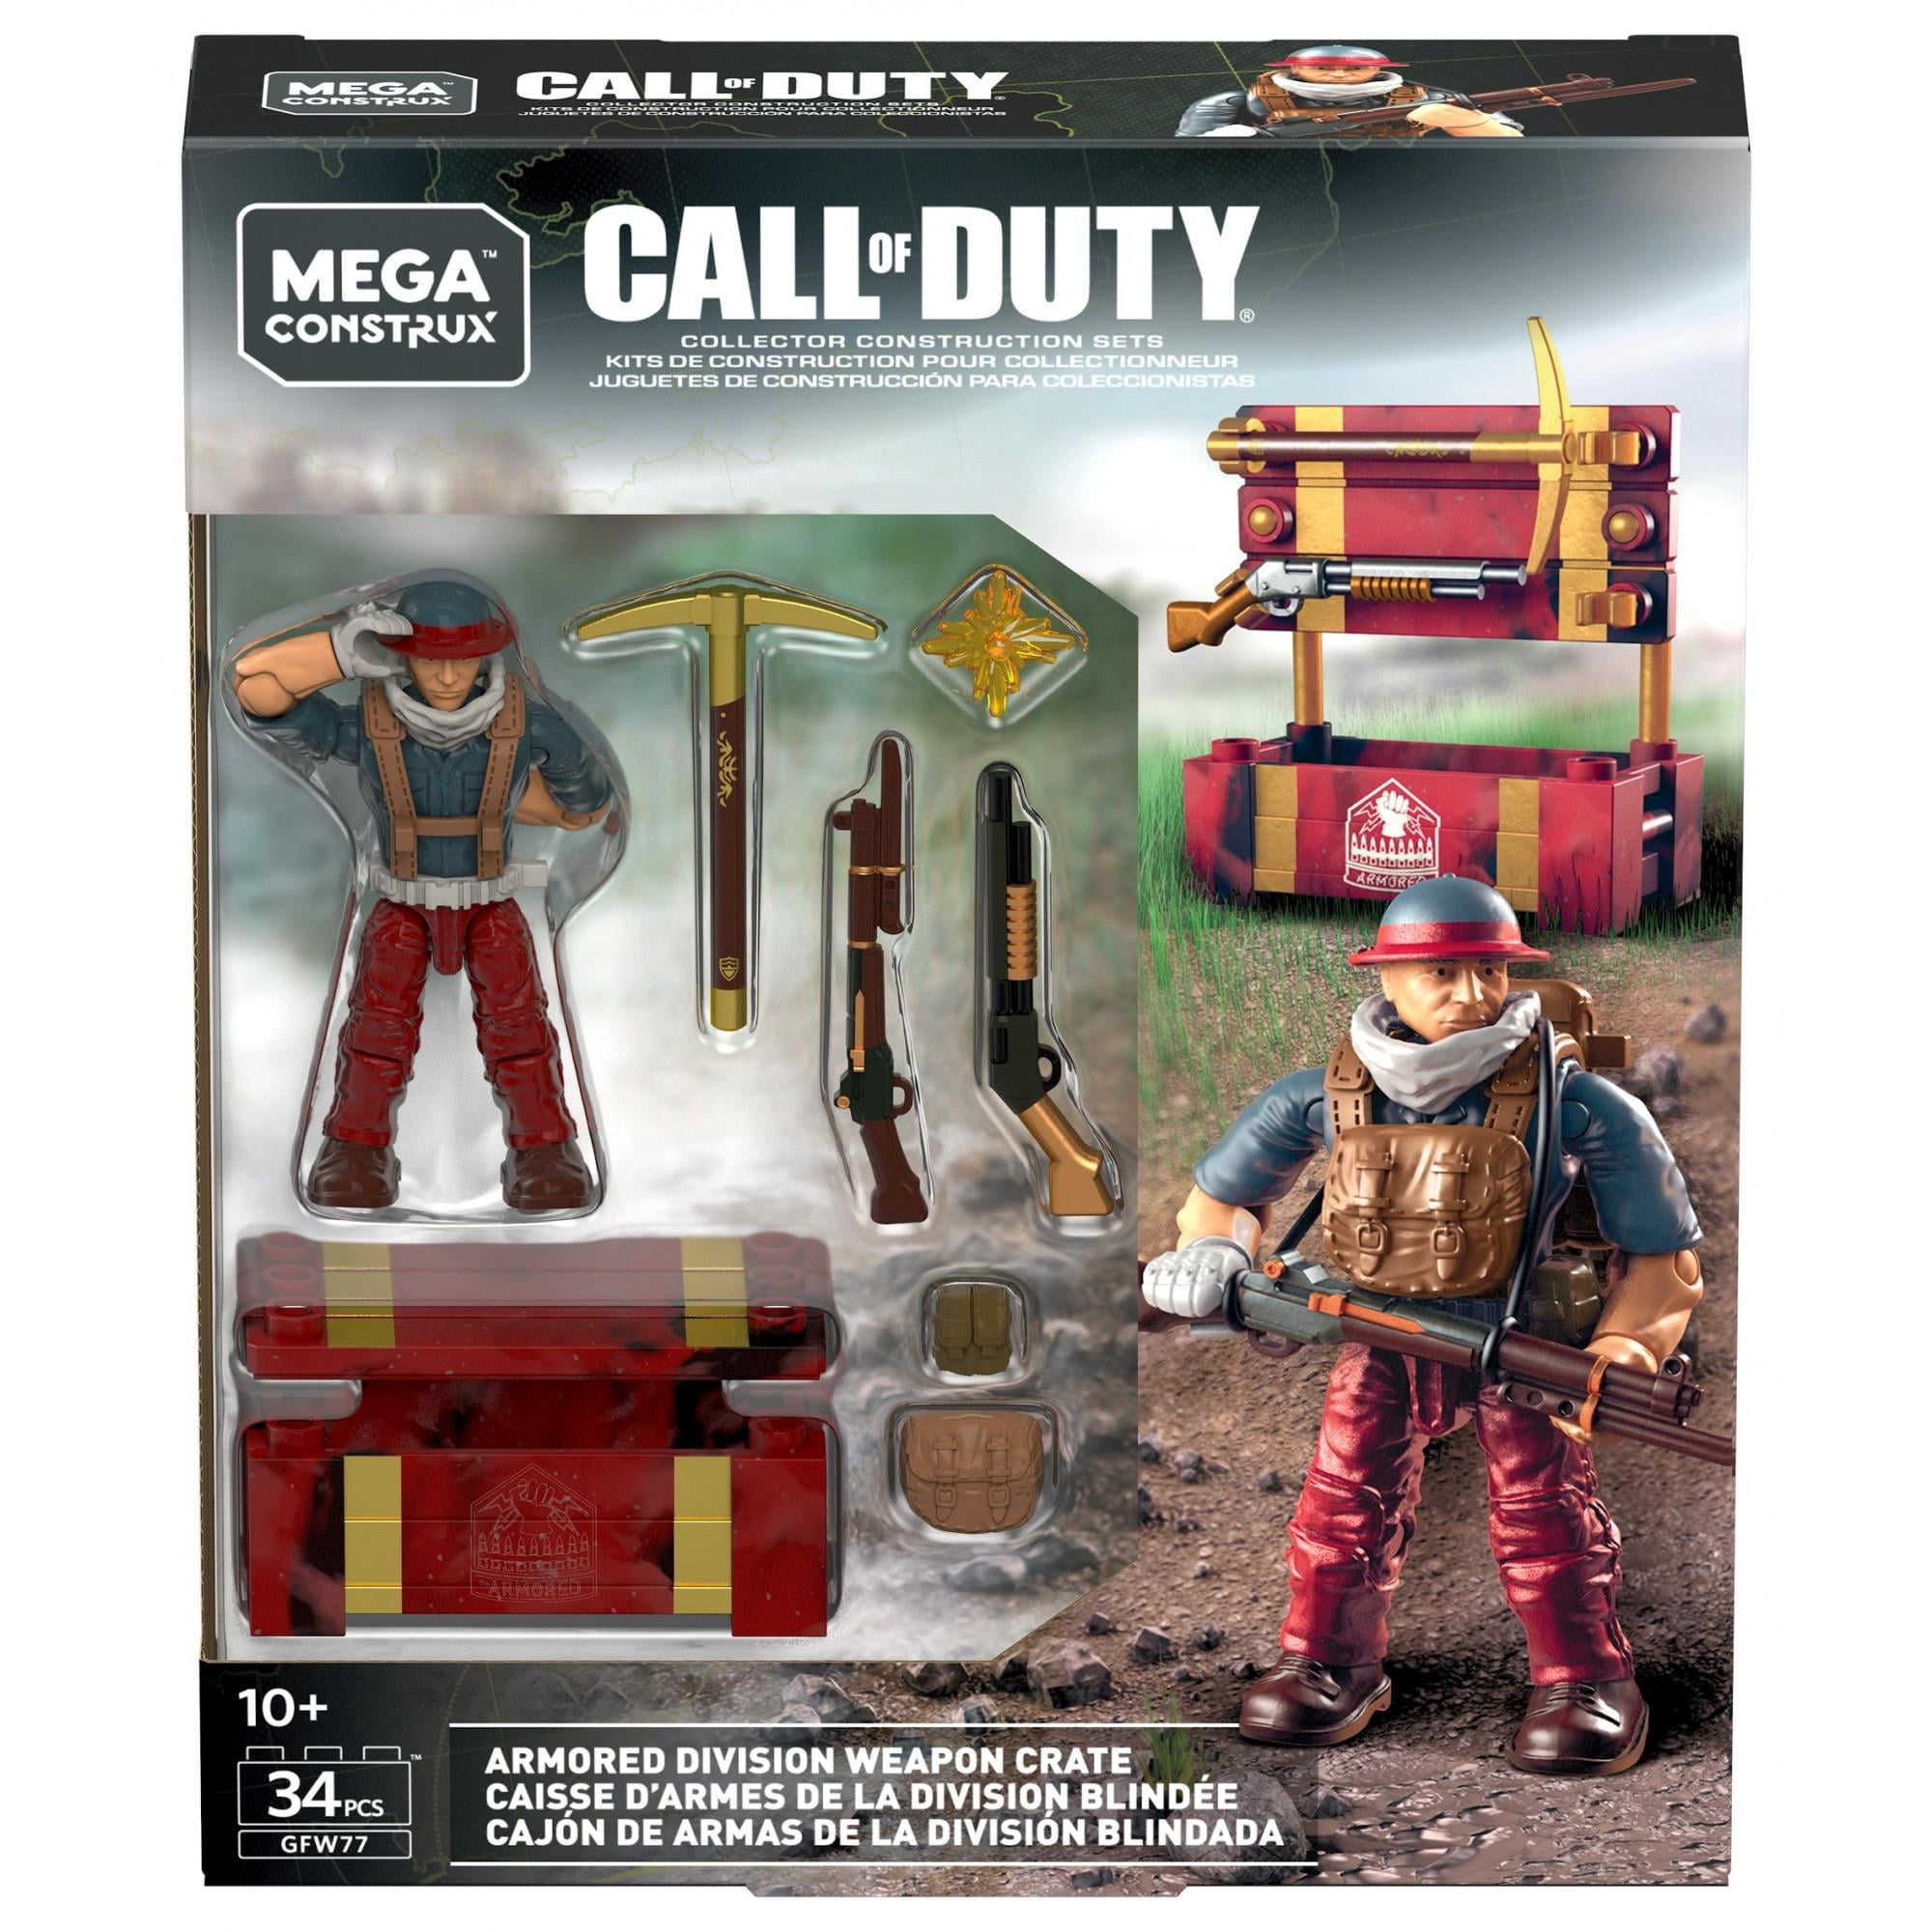 New in stock Mega Construx Call of Duty Desert Mission Weapon Crate